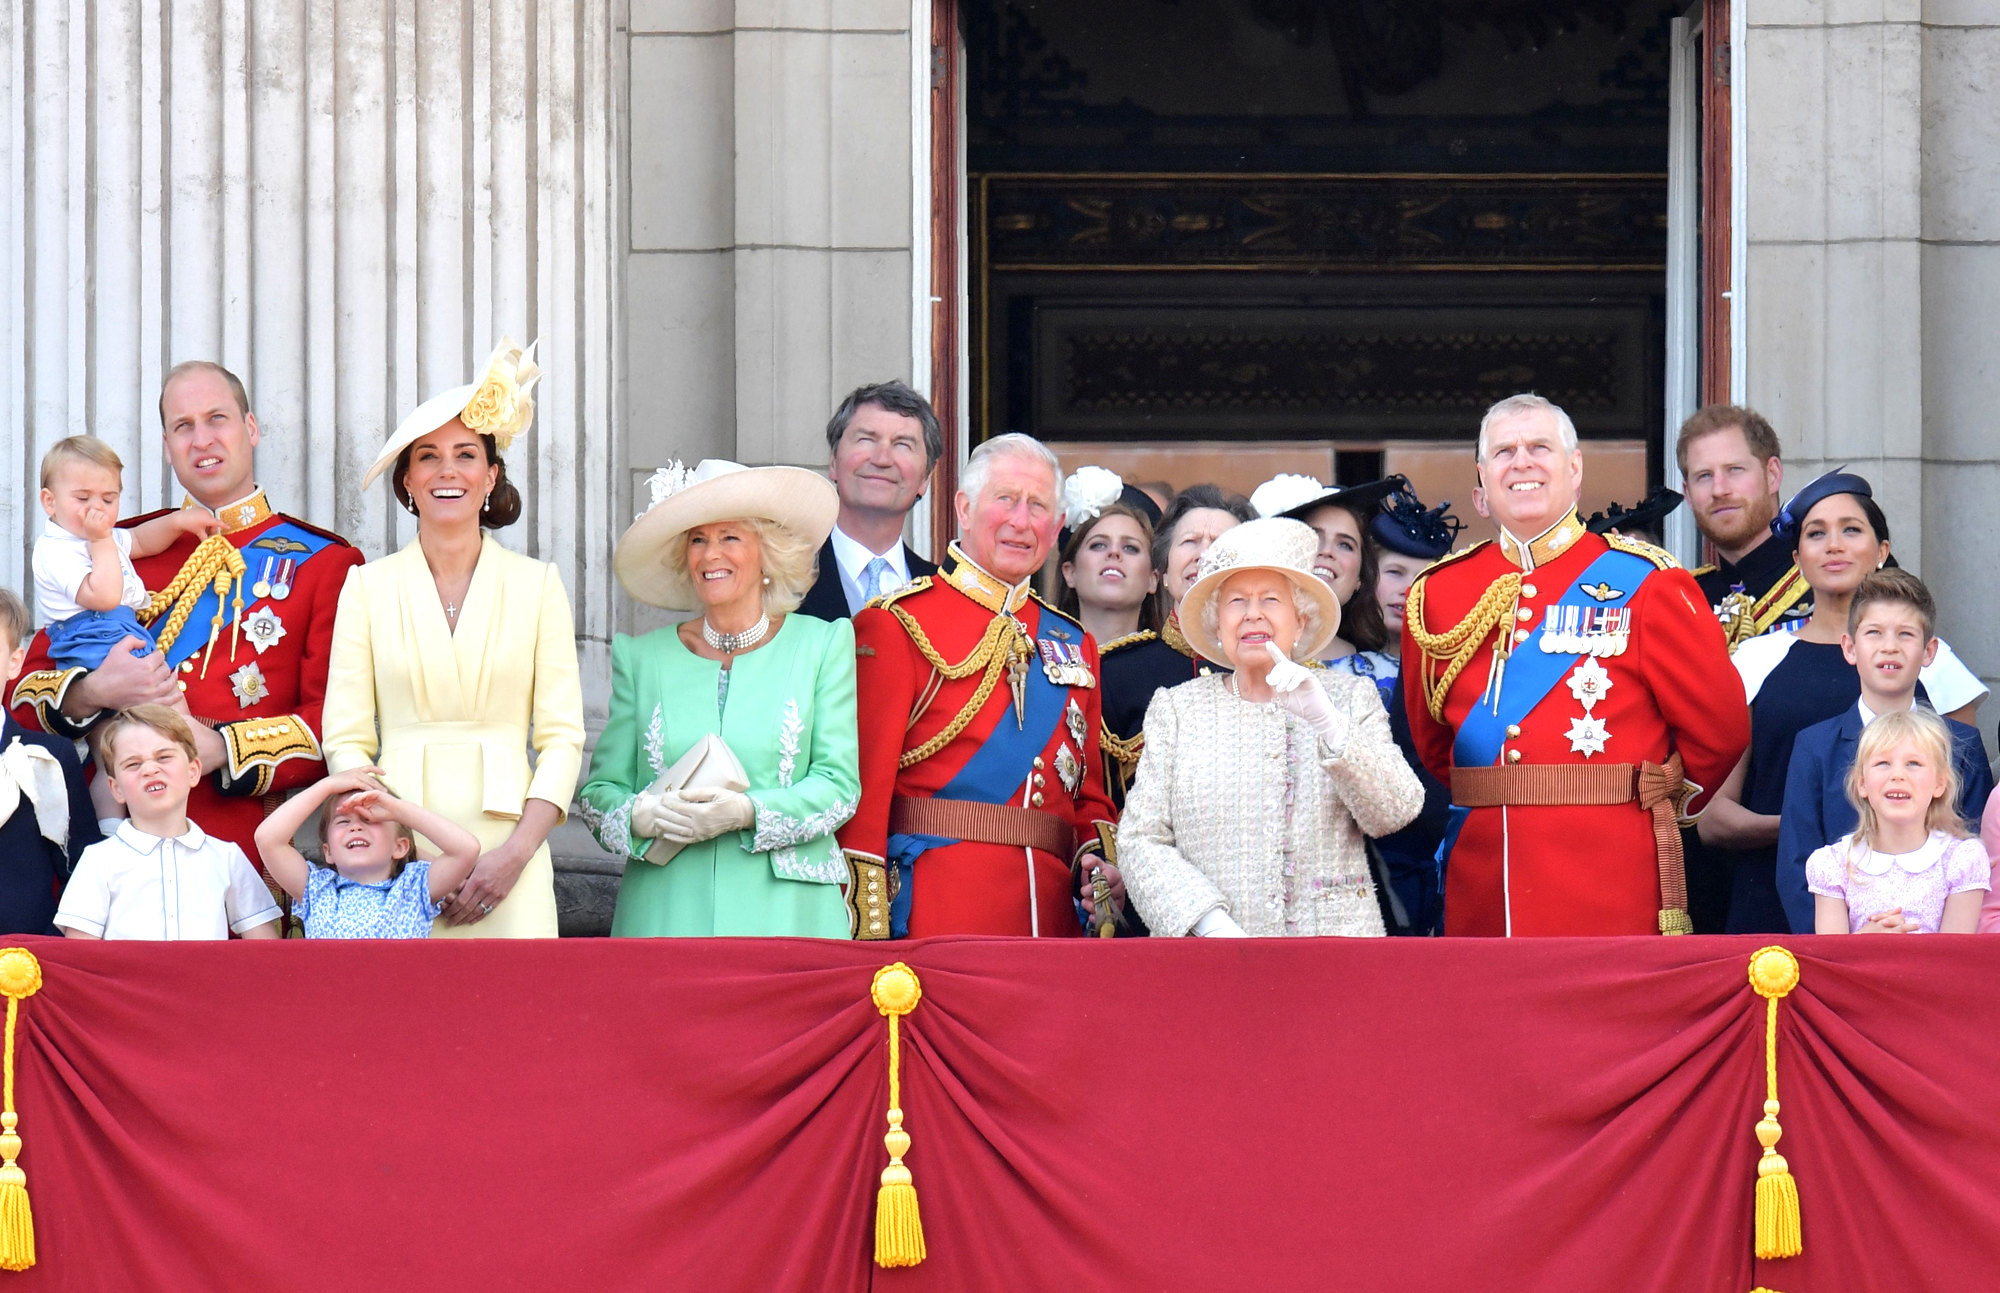 Familia real en Trooping the Colour 2019